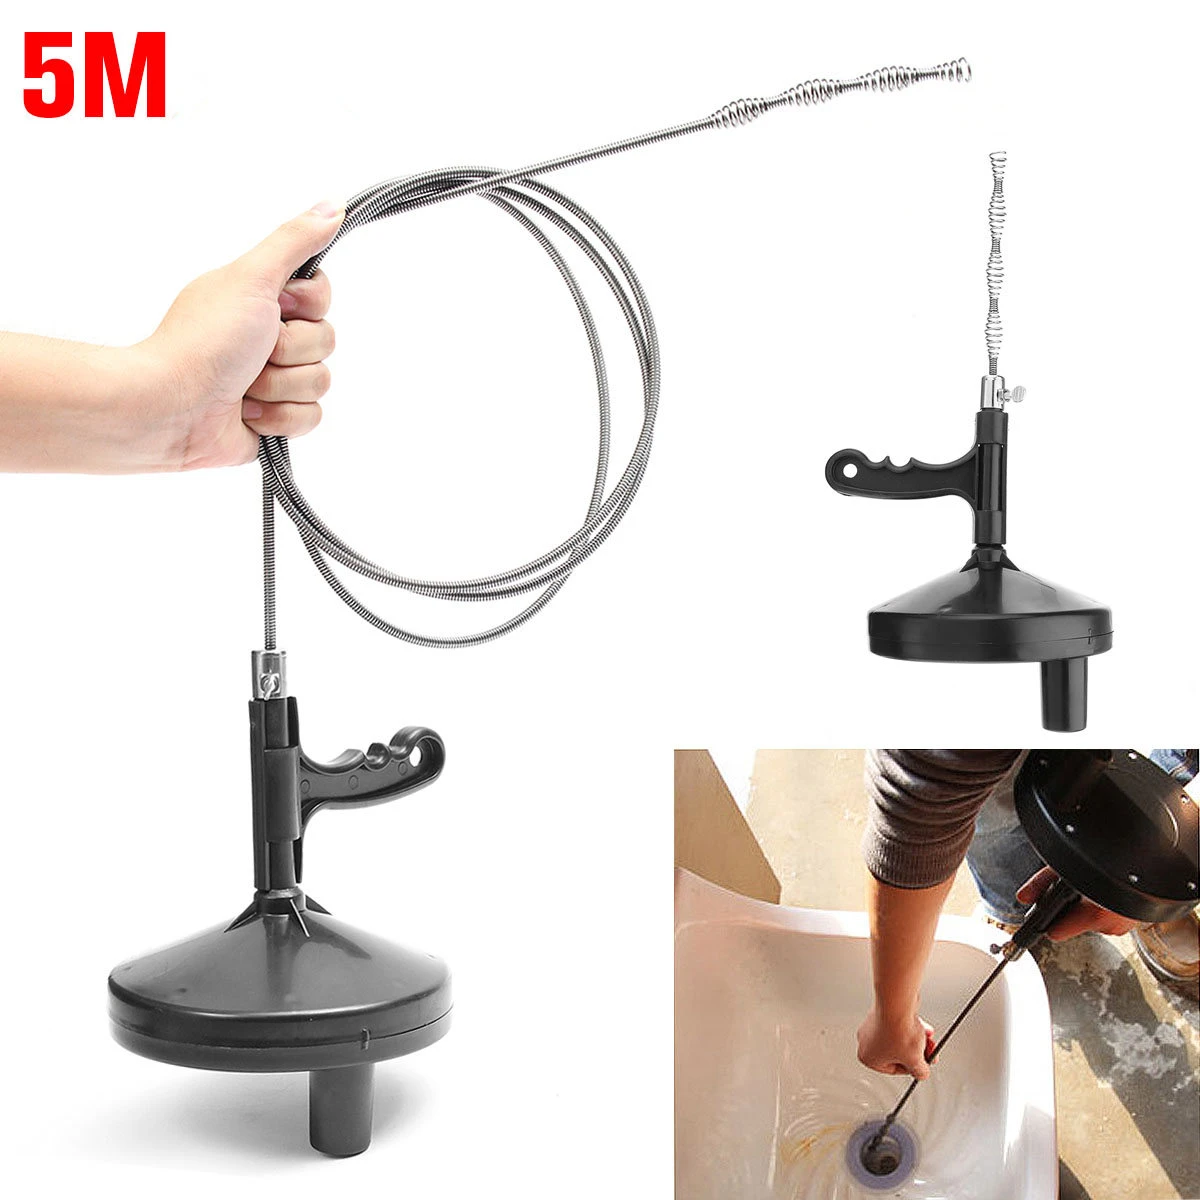 1pcs 5M Toilet Sewer Clog Long Line Steel Spring Hook Kitchen Bathroom Sink Pipe Drain Cleaner Pipeline Hair Cleaning Remover